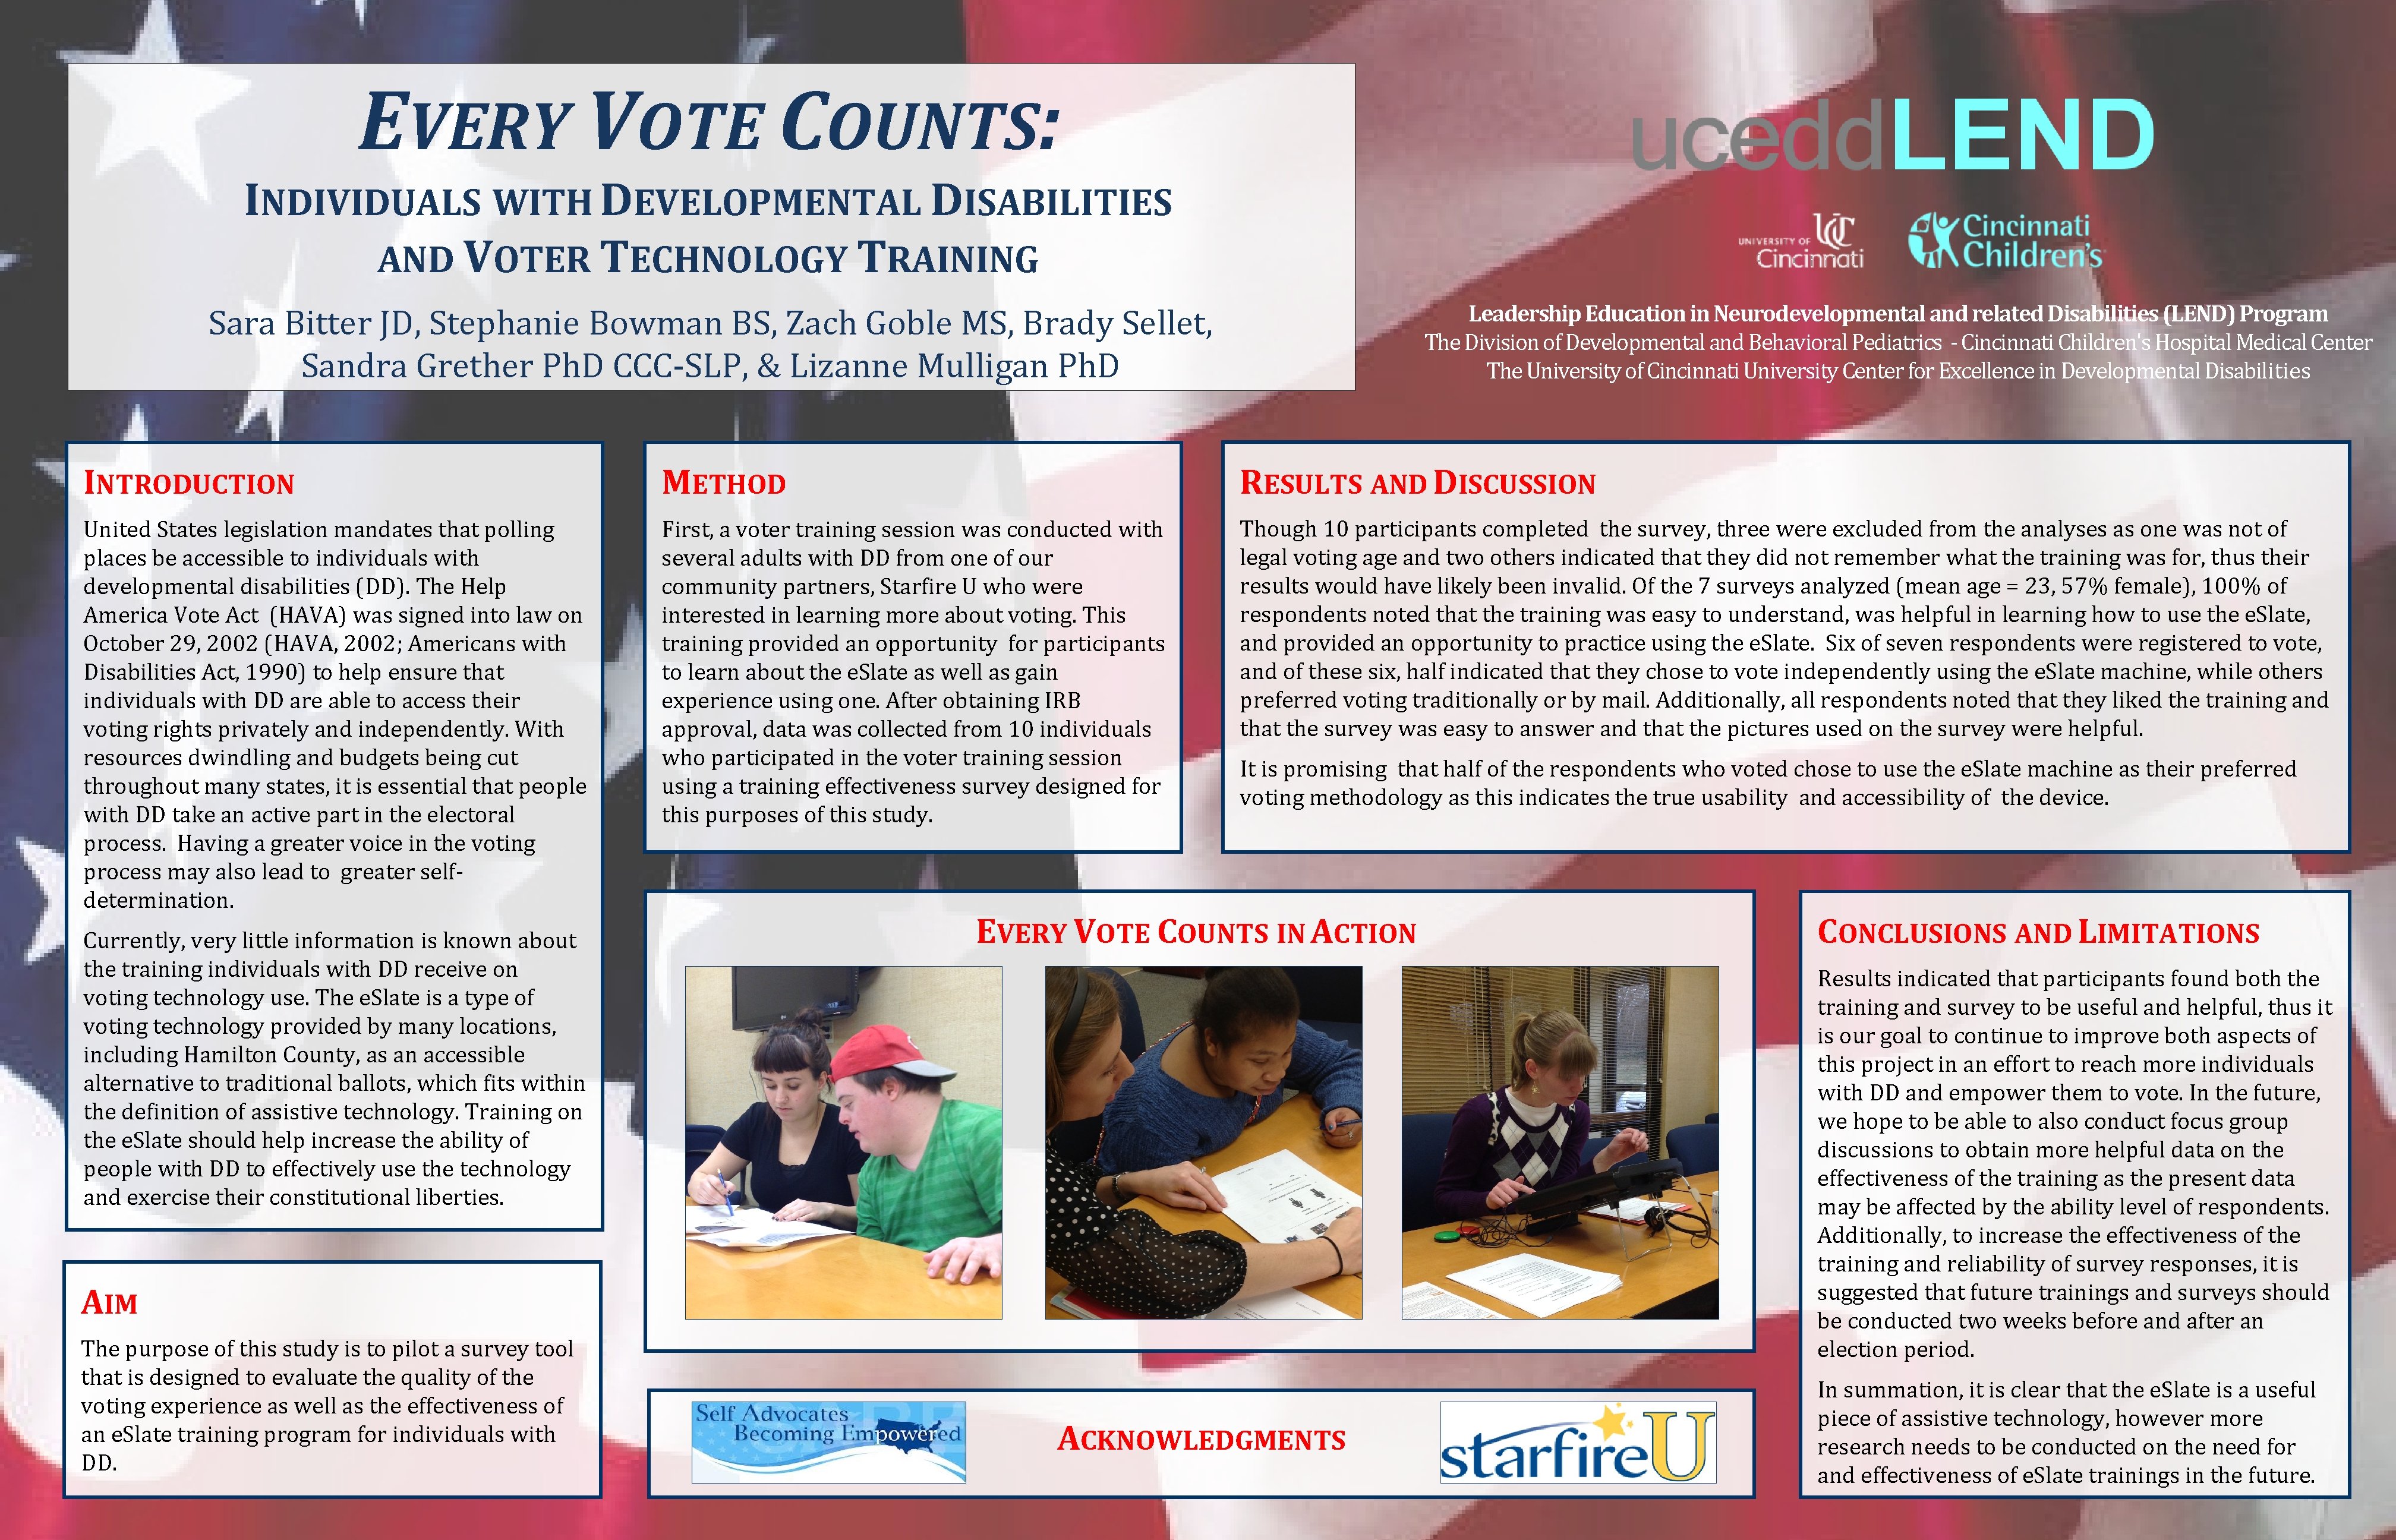 EVERY VOTE COUNTS: INDIVIDUALS WITH DEVELOPMENTAL DISABILITIES AND VOTER TECHNOLOGY TRAINING Leadership Education in